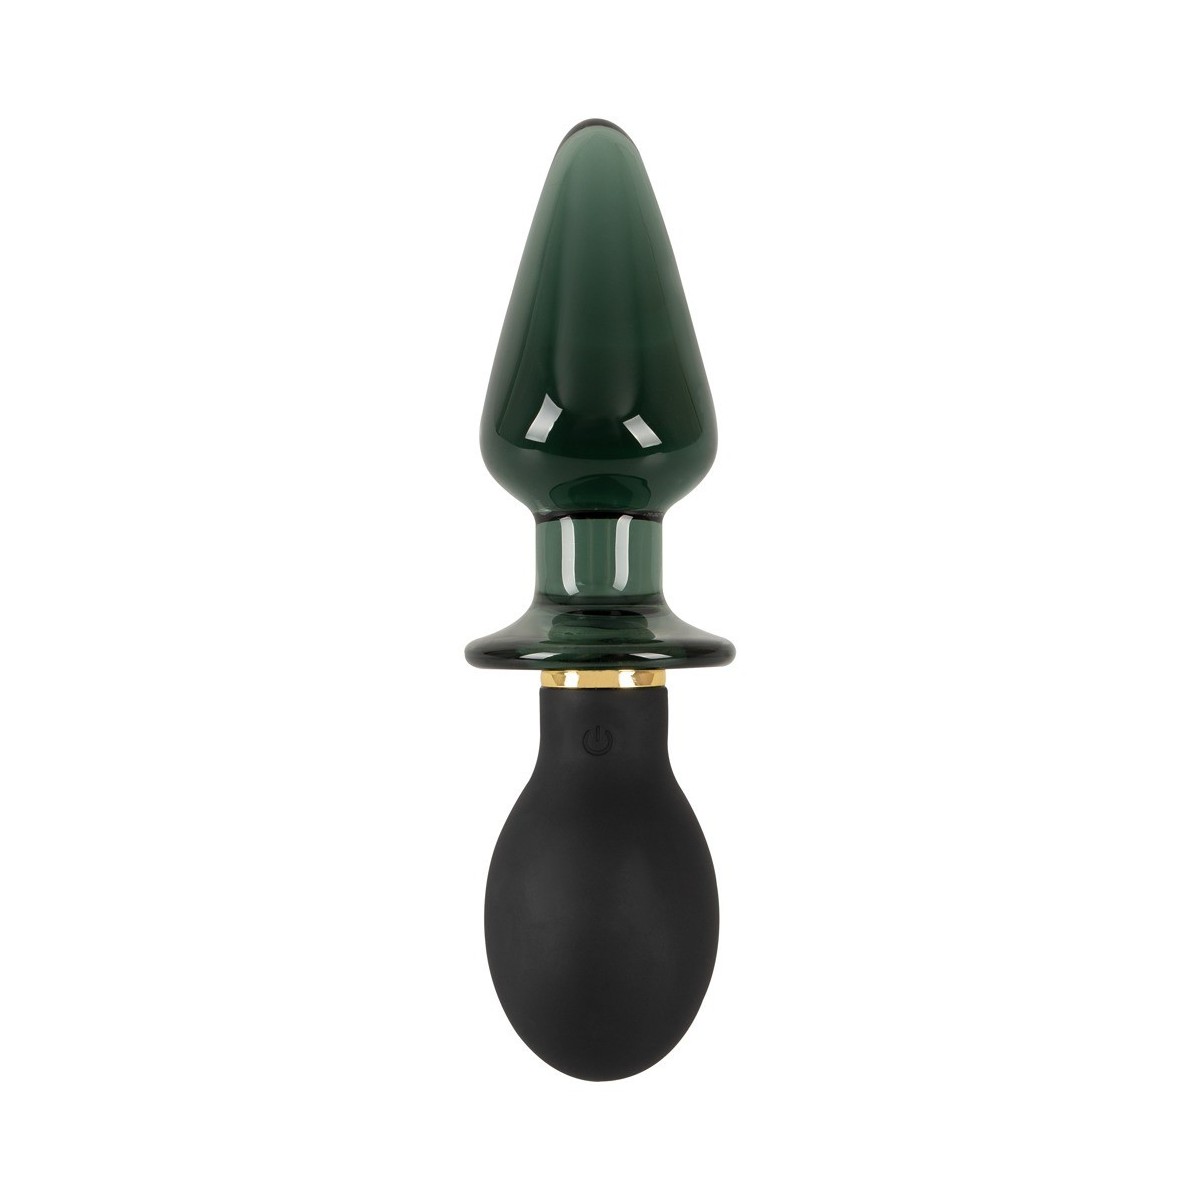 Plug anale vibrante doppio Double-ended Butt Plug with Vibration